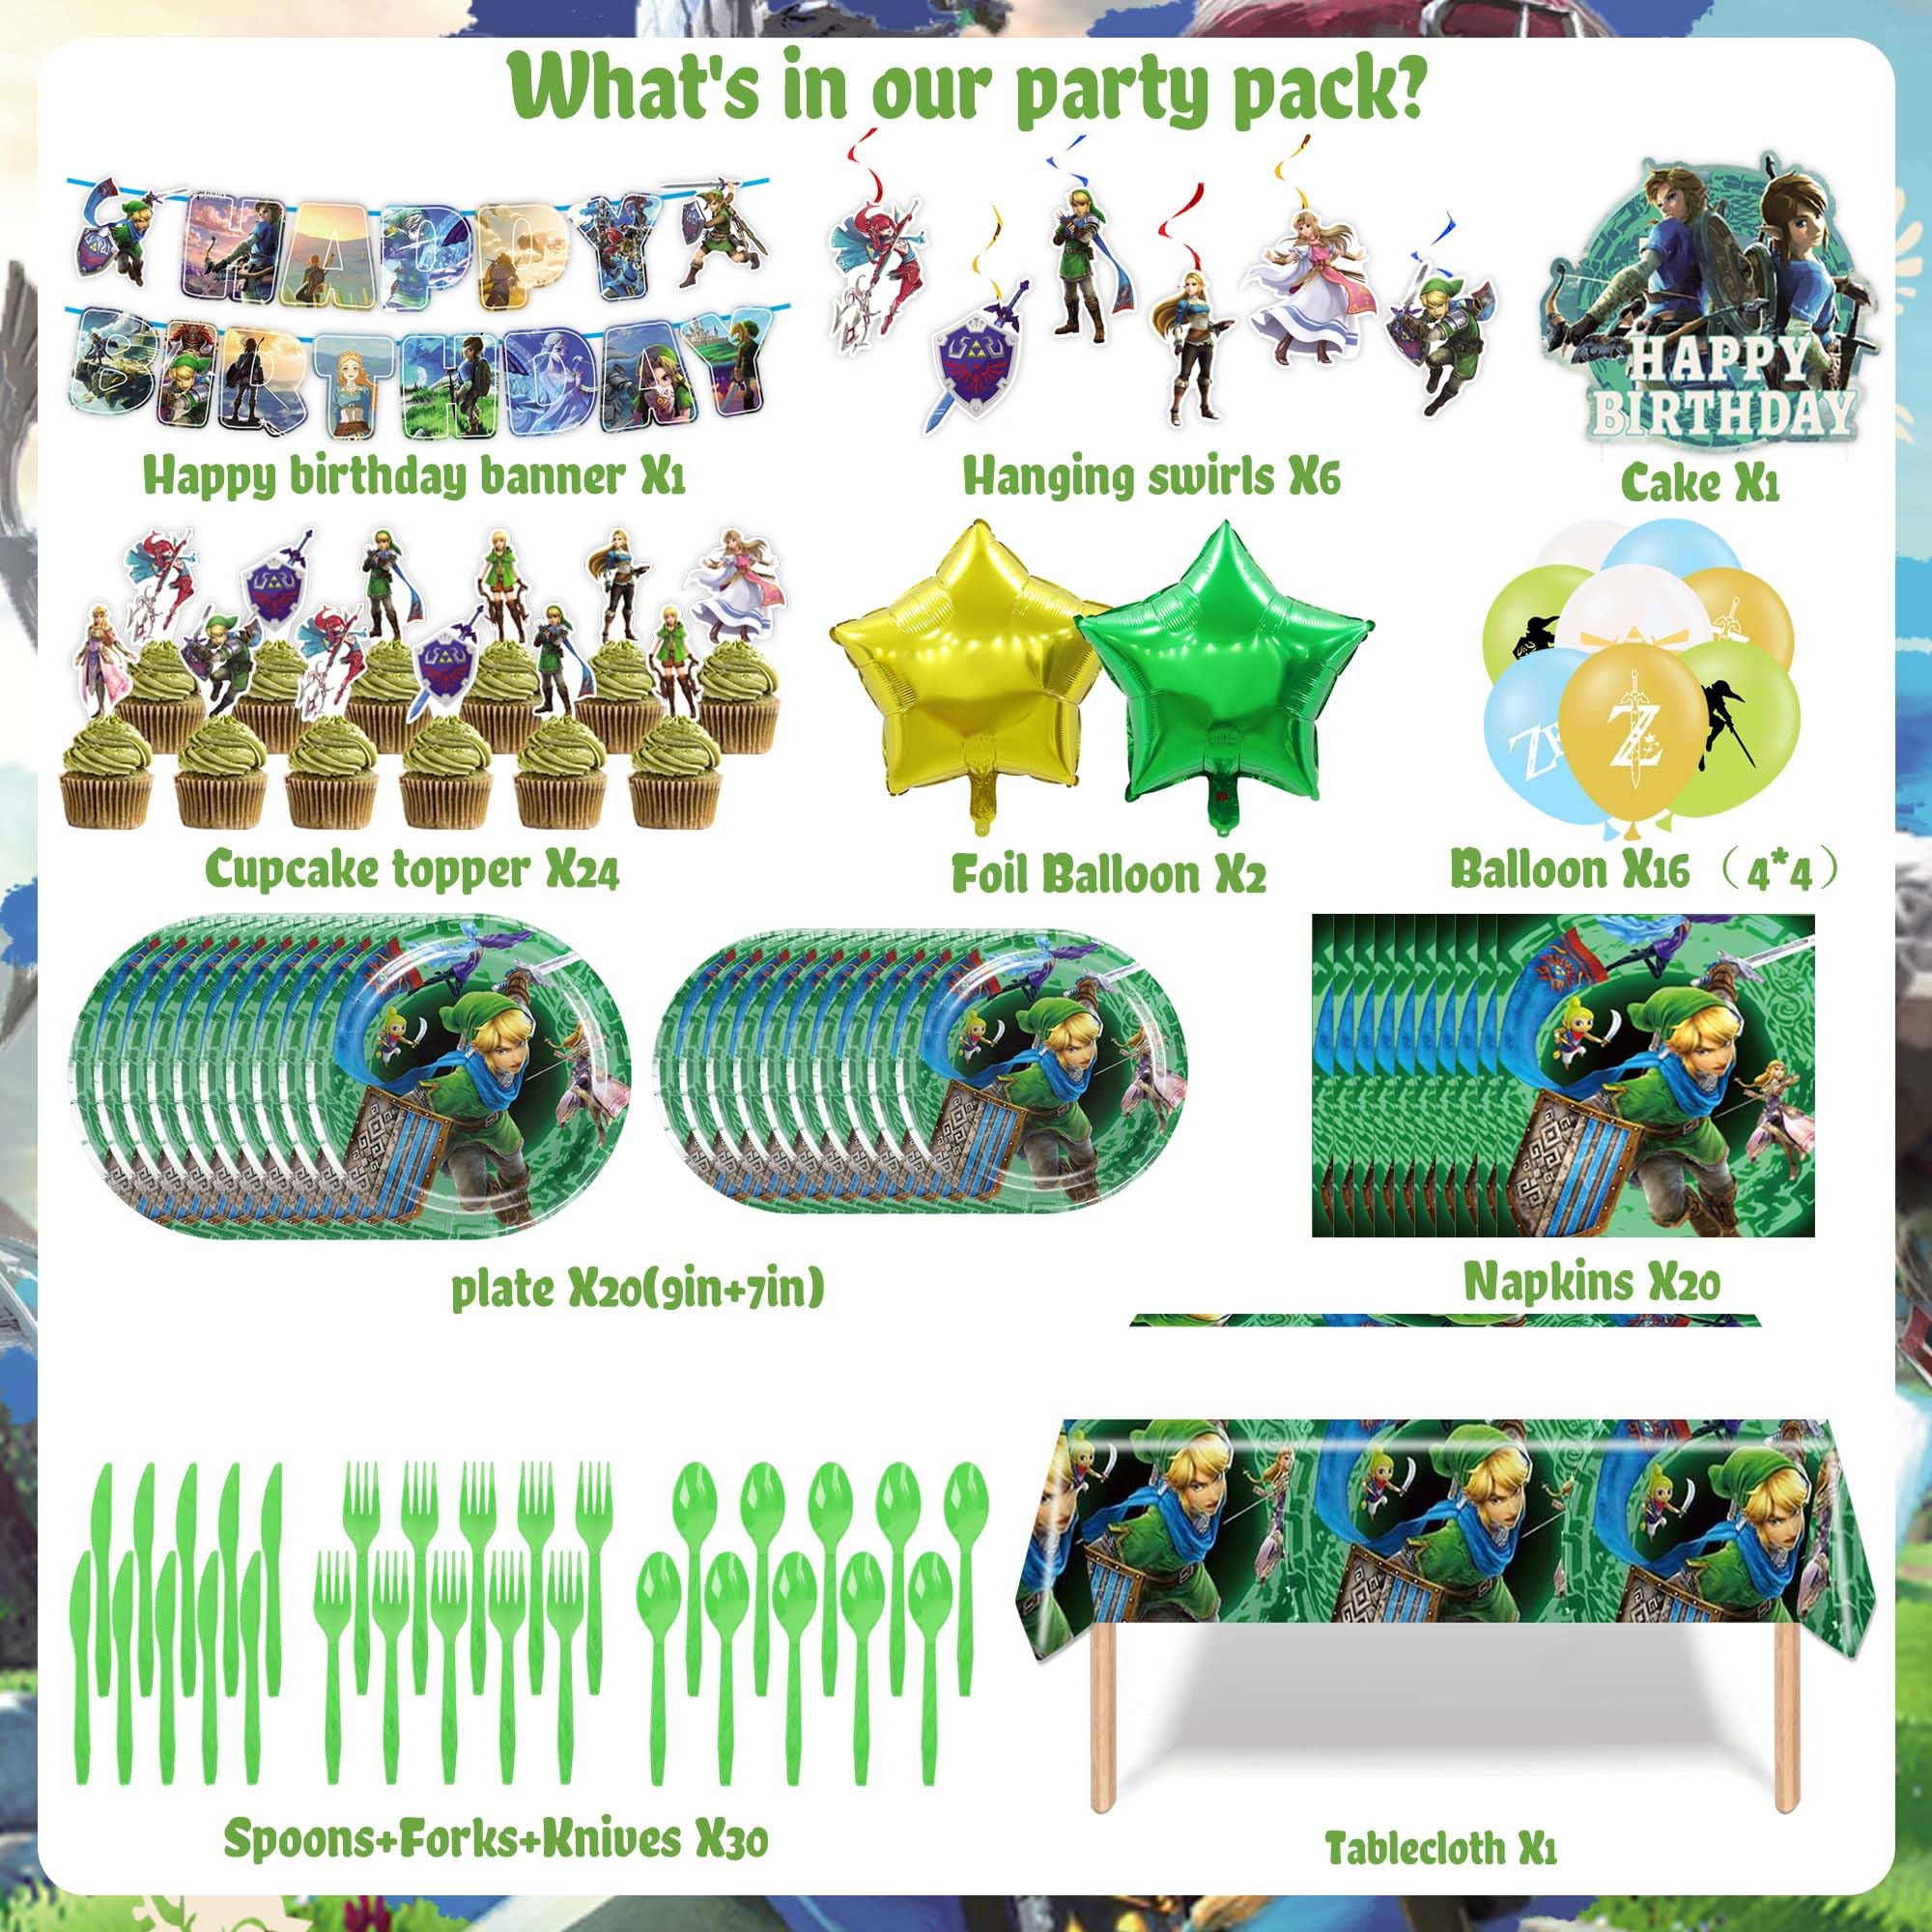 Legend Birthday Party Decorations, Legend Party Supplies Set Include Banner, Hanging Swirls, Tablecloth, Tableware, Balloons, Cake Toppers, Legend Party Favors